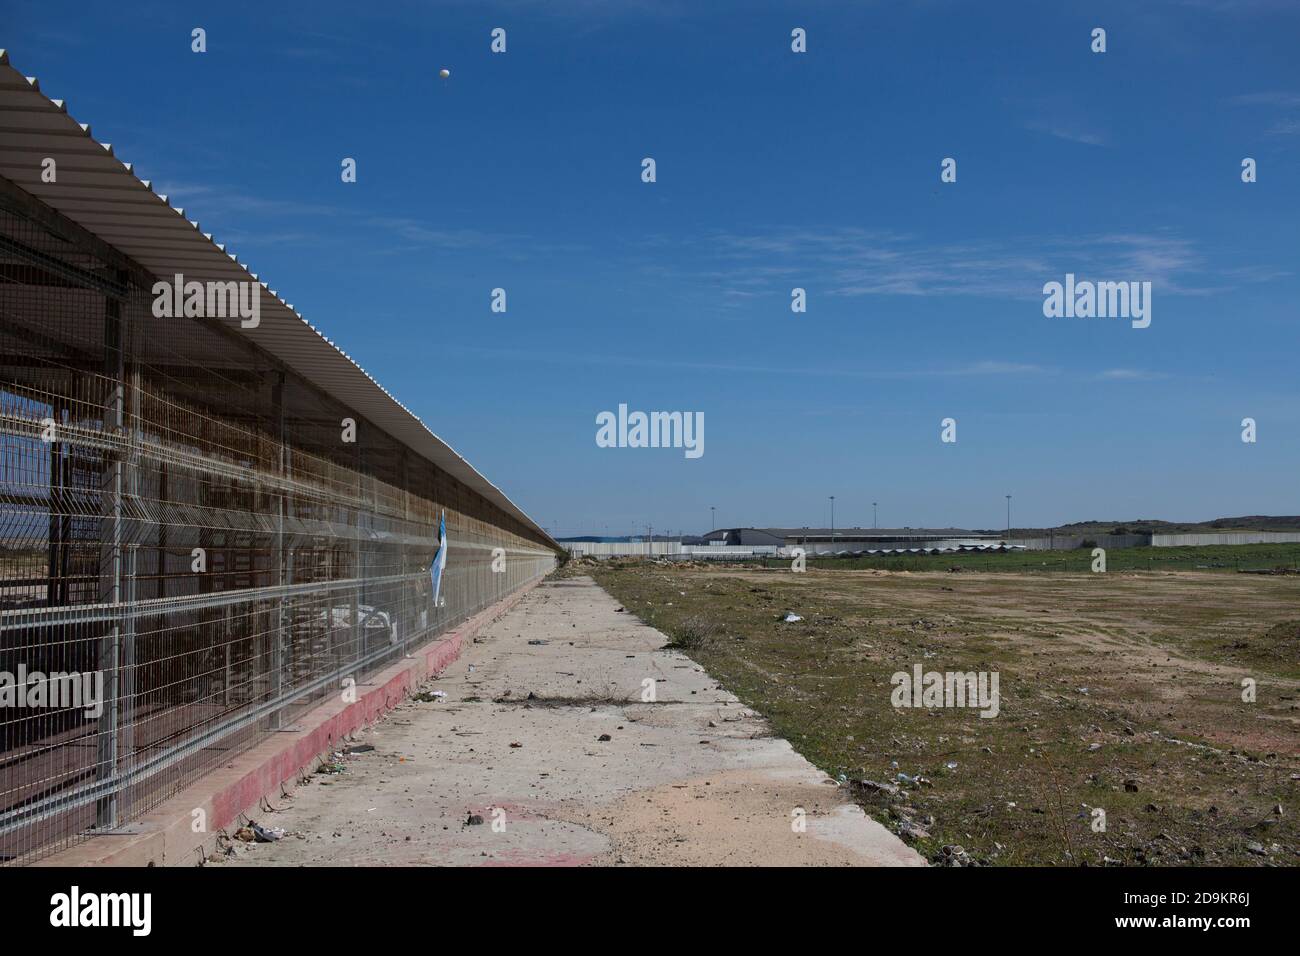 The wall between Israel and Palestine and the security installations Stock Photo